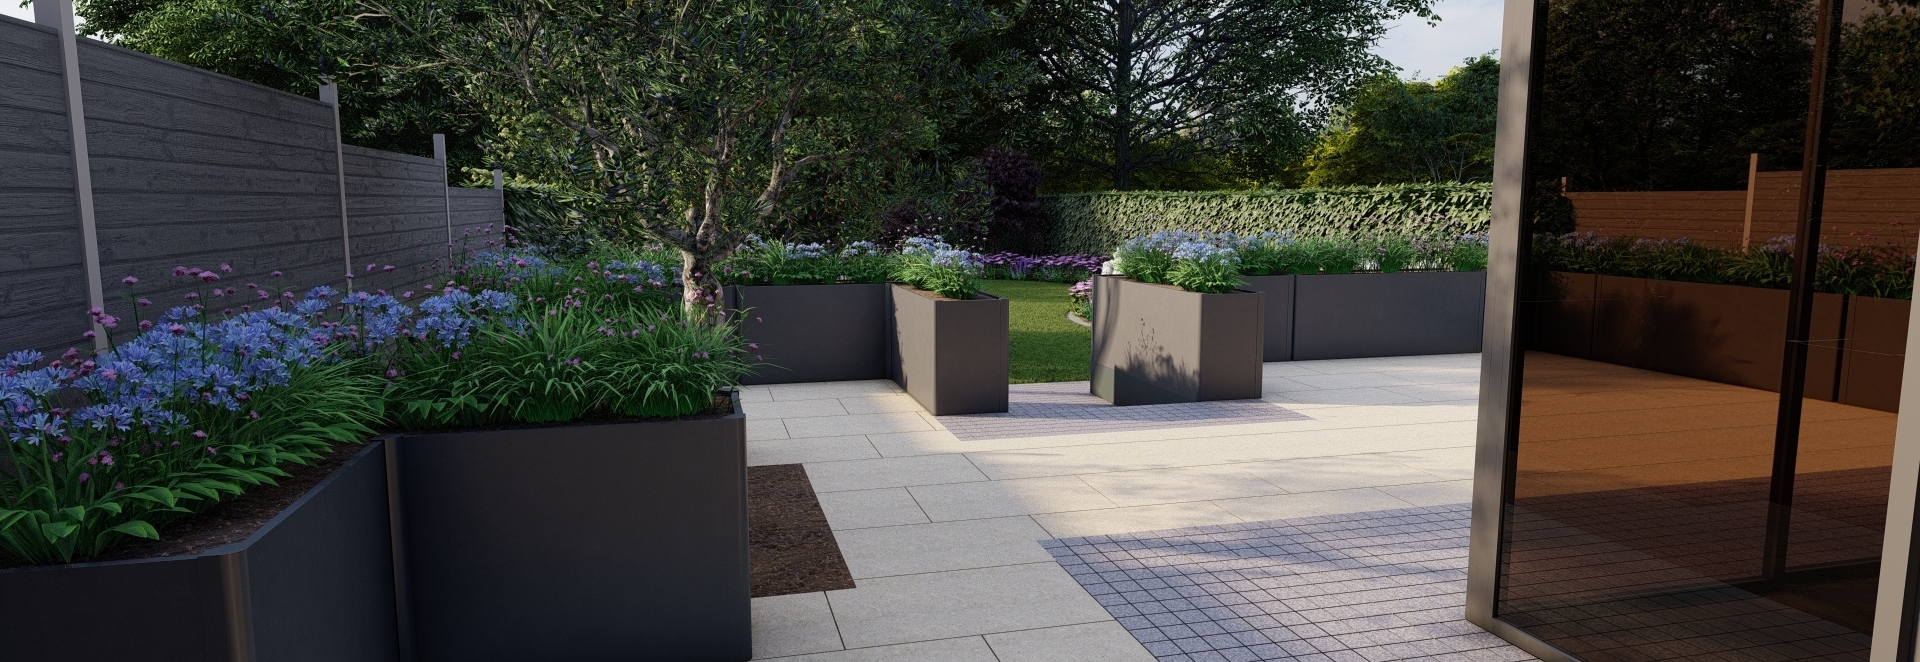 A Garden Design for a large Family garden in Mount Merrion, Co Dublin features an expansive  Raised Patio with the emphasis on the provision of space for separate formal & casual dining areas framed by stunning Biohort Steel Planters, Egyptian Limestone paving, colourful low maintenance Herbaceous planted borders and large lawn area |   Owen Chubb Garden Design, Tel 087-2306 128